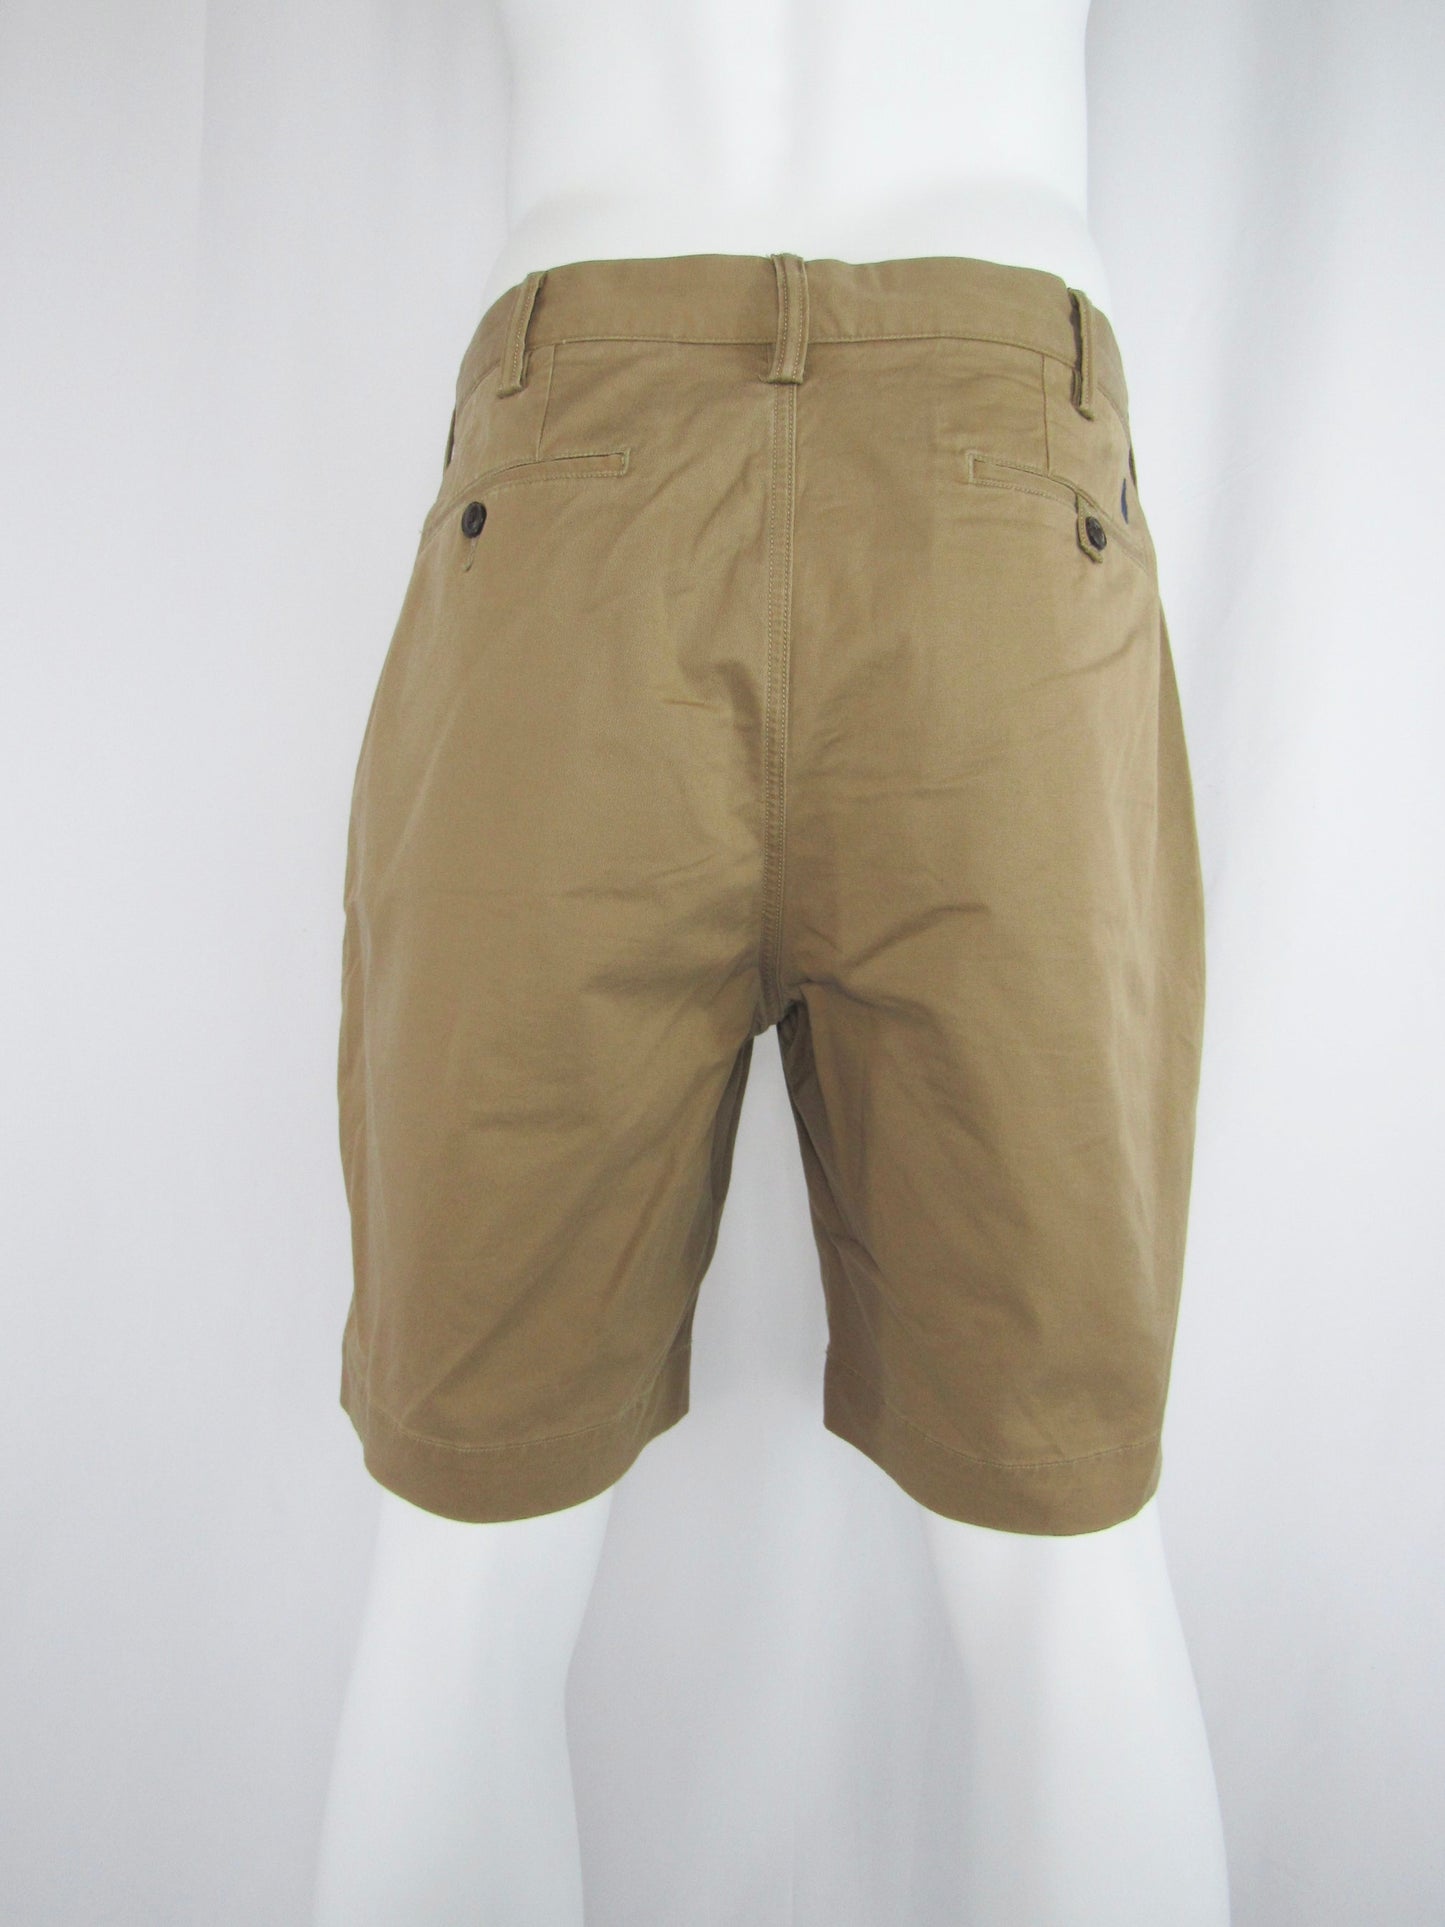 RALPH LAUREN Stretch Classic Fit Chino Shorts - Size 34